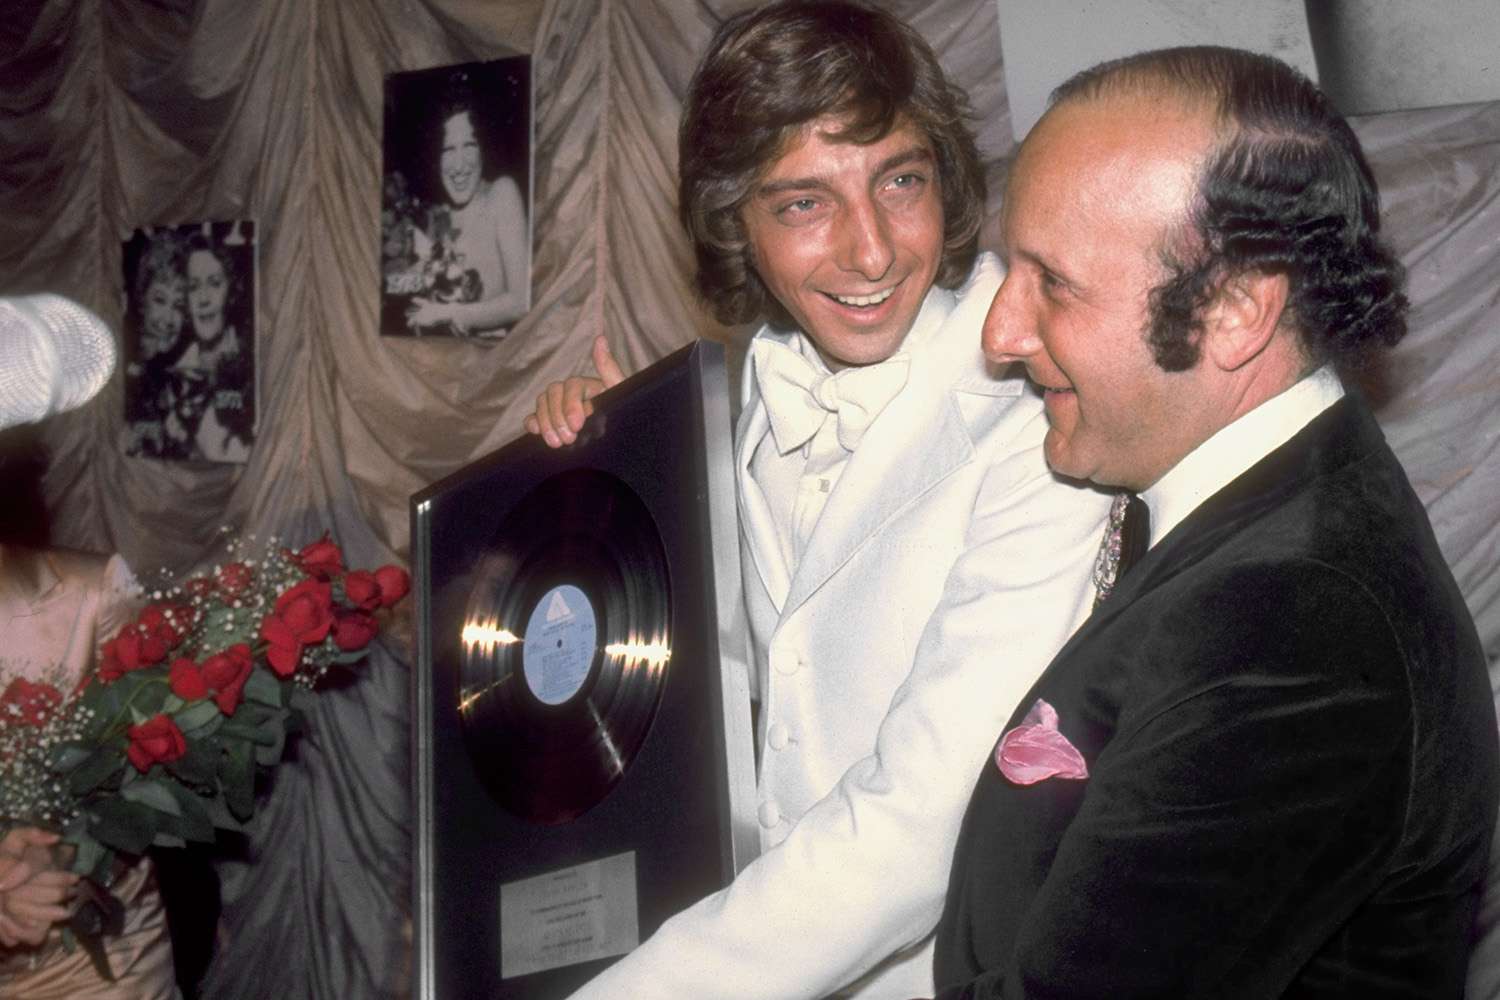 18541A2E Barry Manilow with Arista records pres. Clive Davis (R) at AFTER DARK magazine party honoring Manilow as Entertainer of the Year. 1978 BARRY MANILOW 00853524.JPG PHOTOGRAPHER FREELANCE Photo by Robin Platzer/Twin Images/Time Life Pictures/Getty Images